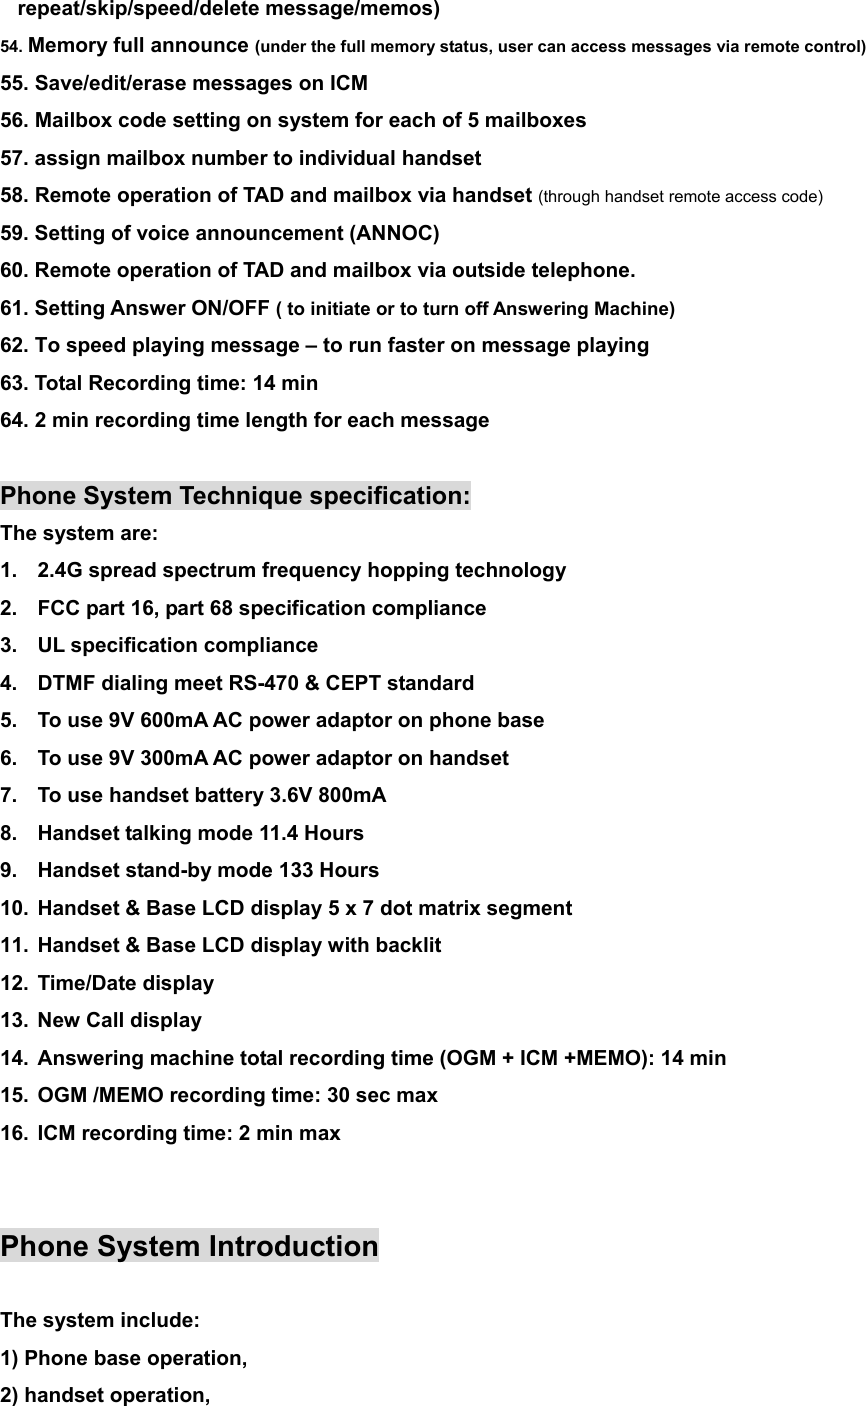 repeat/skip/speed/delete message/memos) 54. Memory full announce (under the full memory status, user can access messages via remote control) 55. Save/edit/erase messages on ICM 56. Mailbox code setting on system for each of 5 mailboxes 57. assign mailbox number to individual handset 58. Remote operation of TAD and mailbox via handset (through handset remote access code) 59. Setting of voice announcement (ANNOC) 60. Remote operation of TAD and mailbox via outside telephone. 61. Setting Answer ON/OFF ( to initiate or to turn off Answering Machine) 62. To speed playing message – to run faster on message playing 63. Total Recording time: 14 min 64. 2 min recording time length for each message  Phone System Technique specification: The system are: 1.  2.4G spread spectrum frequency hopping technology 2.  FCC part 16, part 68 specification compliance 3.  UL specification compliance 4.  DTMF dialing meet RS-470 &amp; CEPT standard 5.  To use 9V 600mA AC power adaptor on phone base 6.  To use 9V 300mA AC power adaptor on handset 7.  To use handset battery 3.6V 800mA 8.  Handset talking mode 11.4 Hours 9.  Handset stand-by mode 133 Hours 10.  Handset &amp; Base LCD display 5 x 7 dot matrix segment 11.  Handset &amp; Base LCD display with backlit 12. Time/Date display 13. New Call display 14.  Answering machine total recording time (OGM + ICM +MEMO): 14 min 15.  OGM /MEMO recording time: 30 sec max 16.  ICM recording time: 2 min max   Phone System Introduction  The system include:   1) Phone base operation,     2) handset operation,     